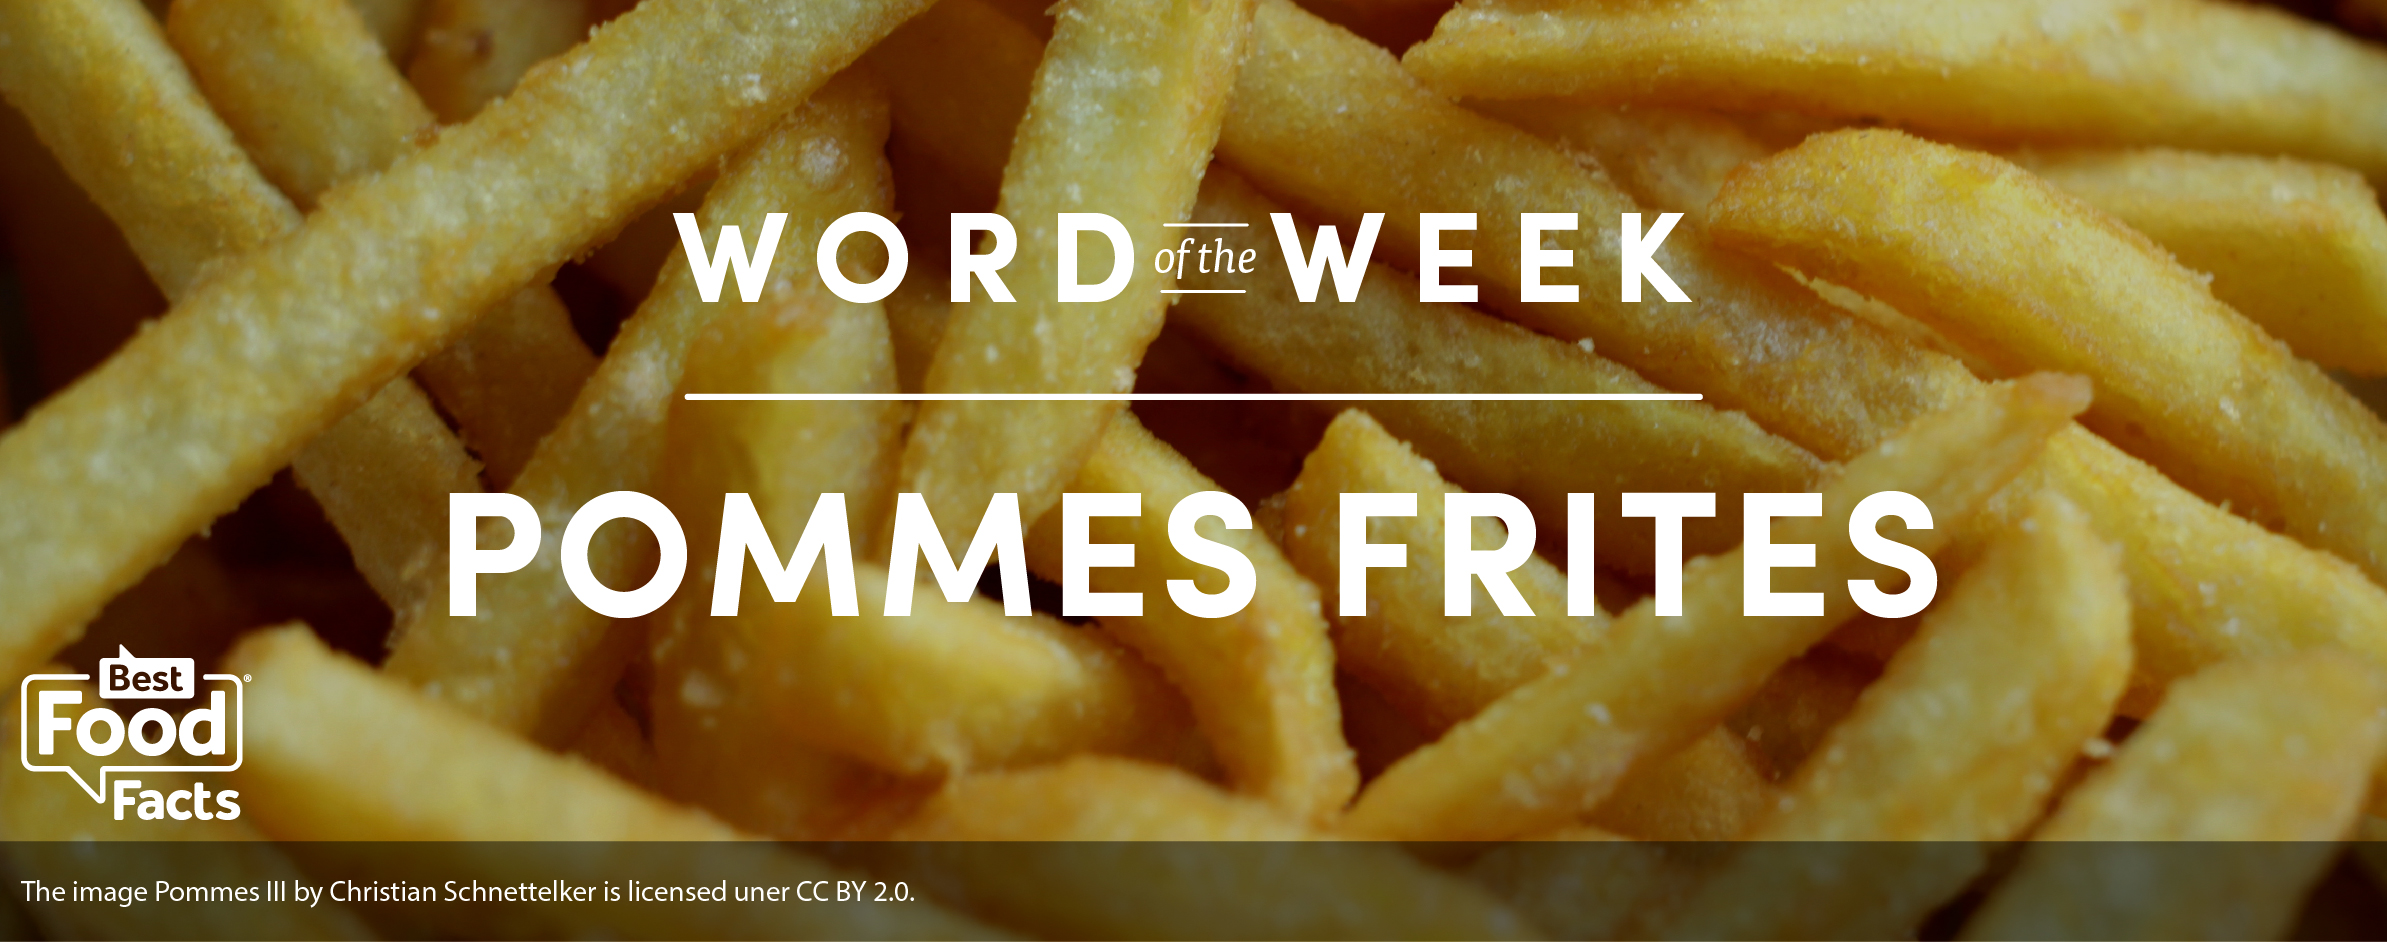 Word of the Week: Pommes Frites | BestFoodFacts.org